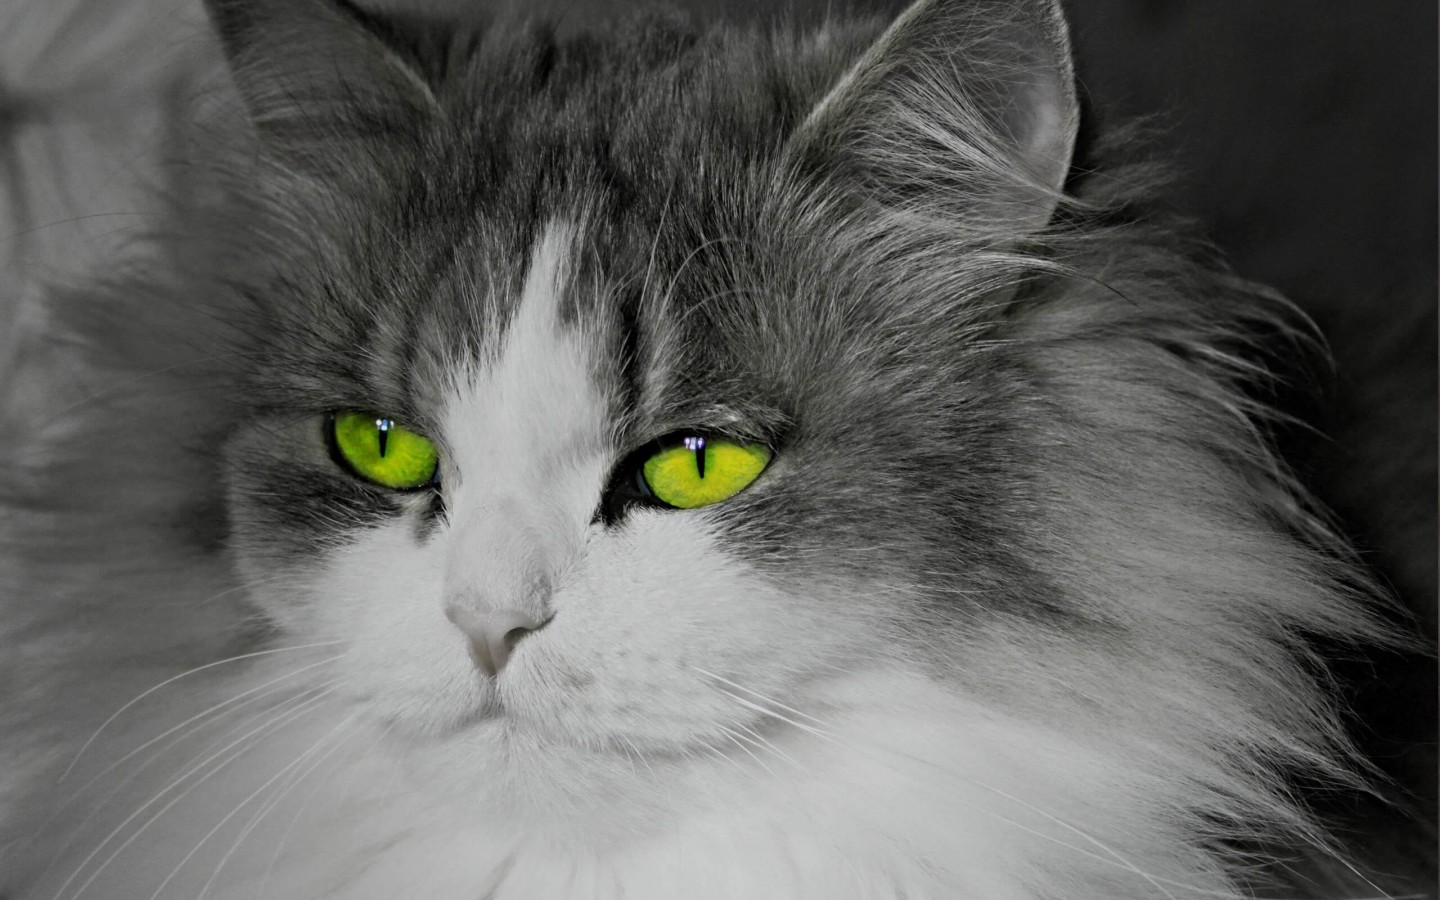 Cat With Stunningly Green Eyes Wallpaper for Desktop 1440x900